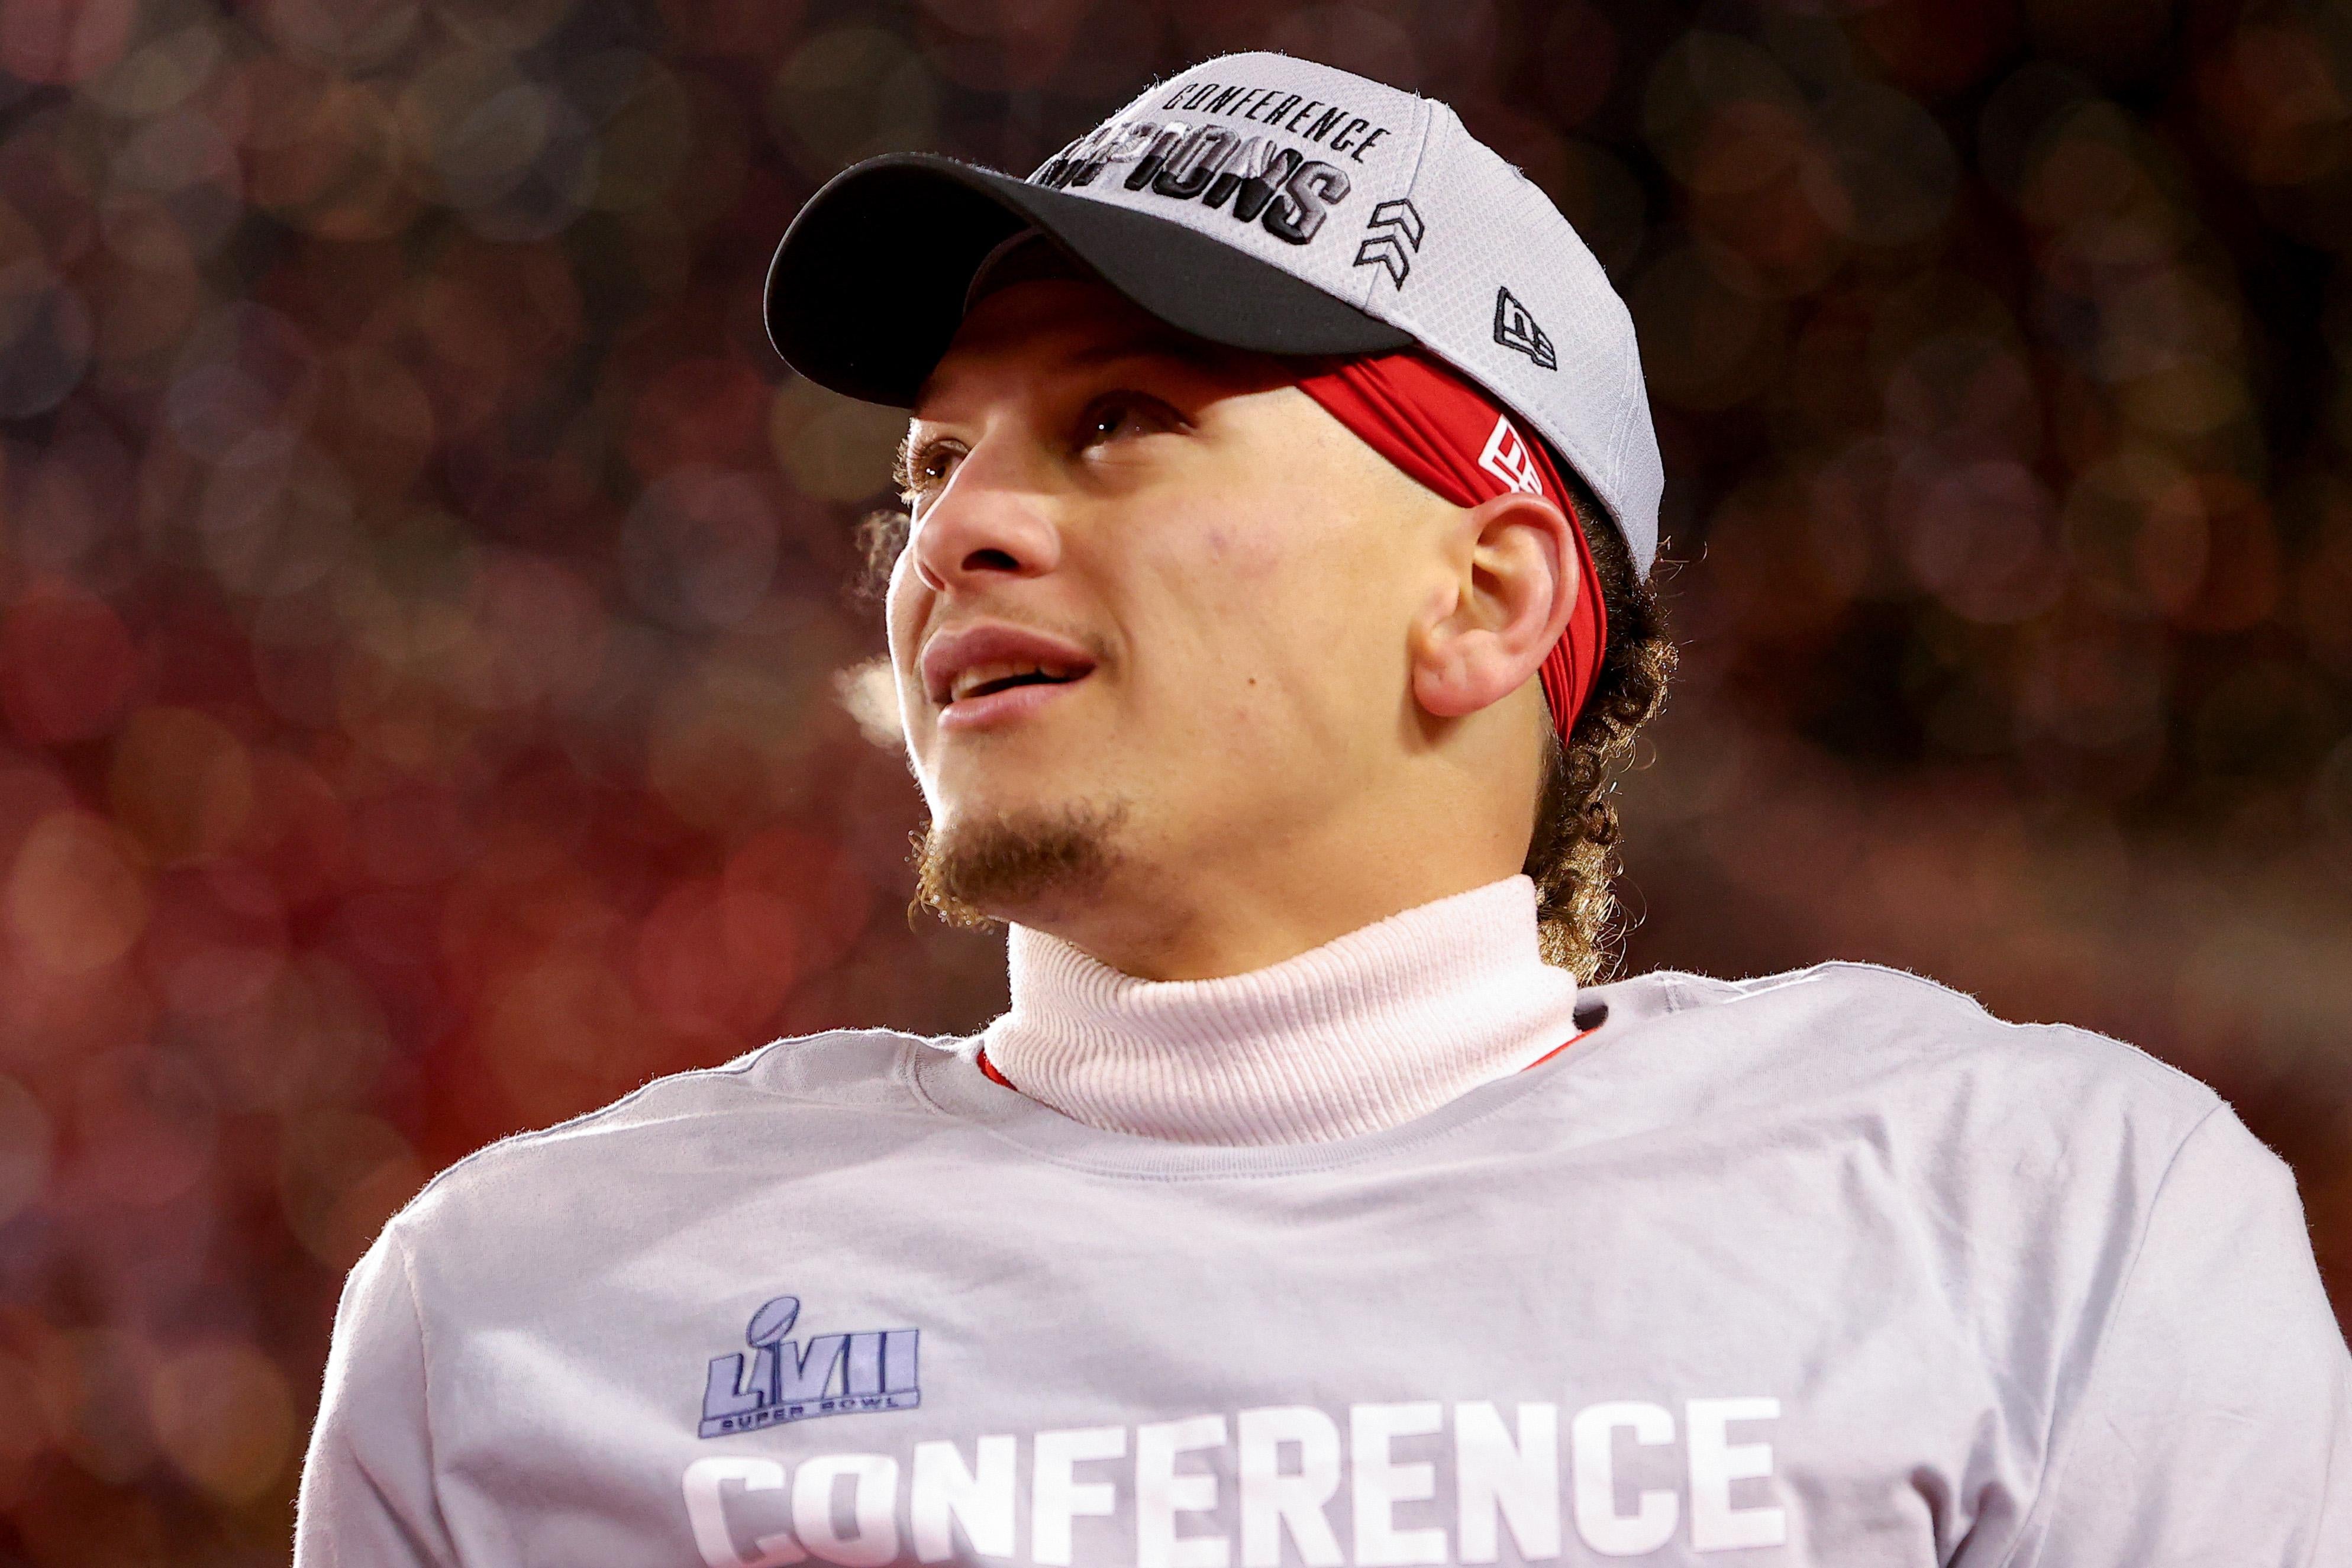 Mahomes gazes upward in his champtionship hat and T-shirt, a slight smile on his face, with confetti falling behind him